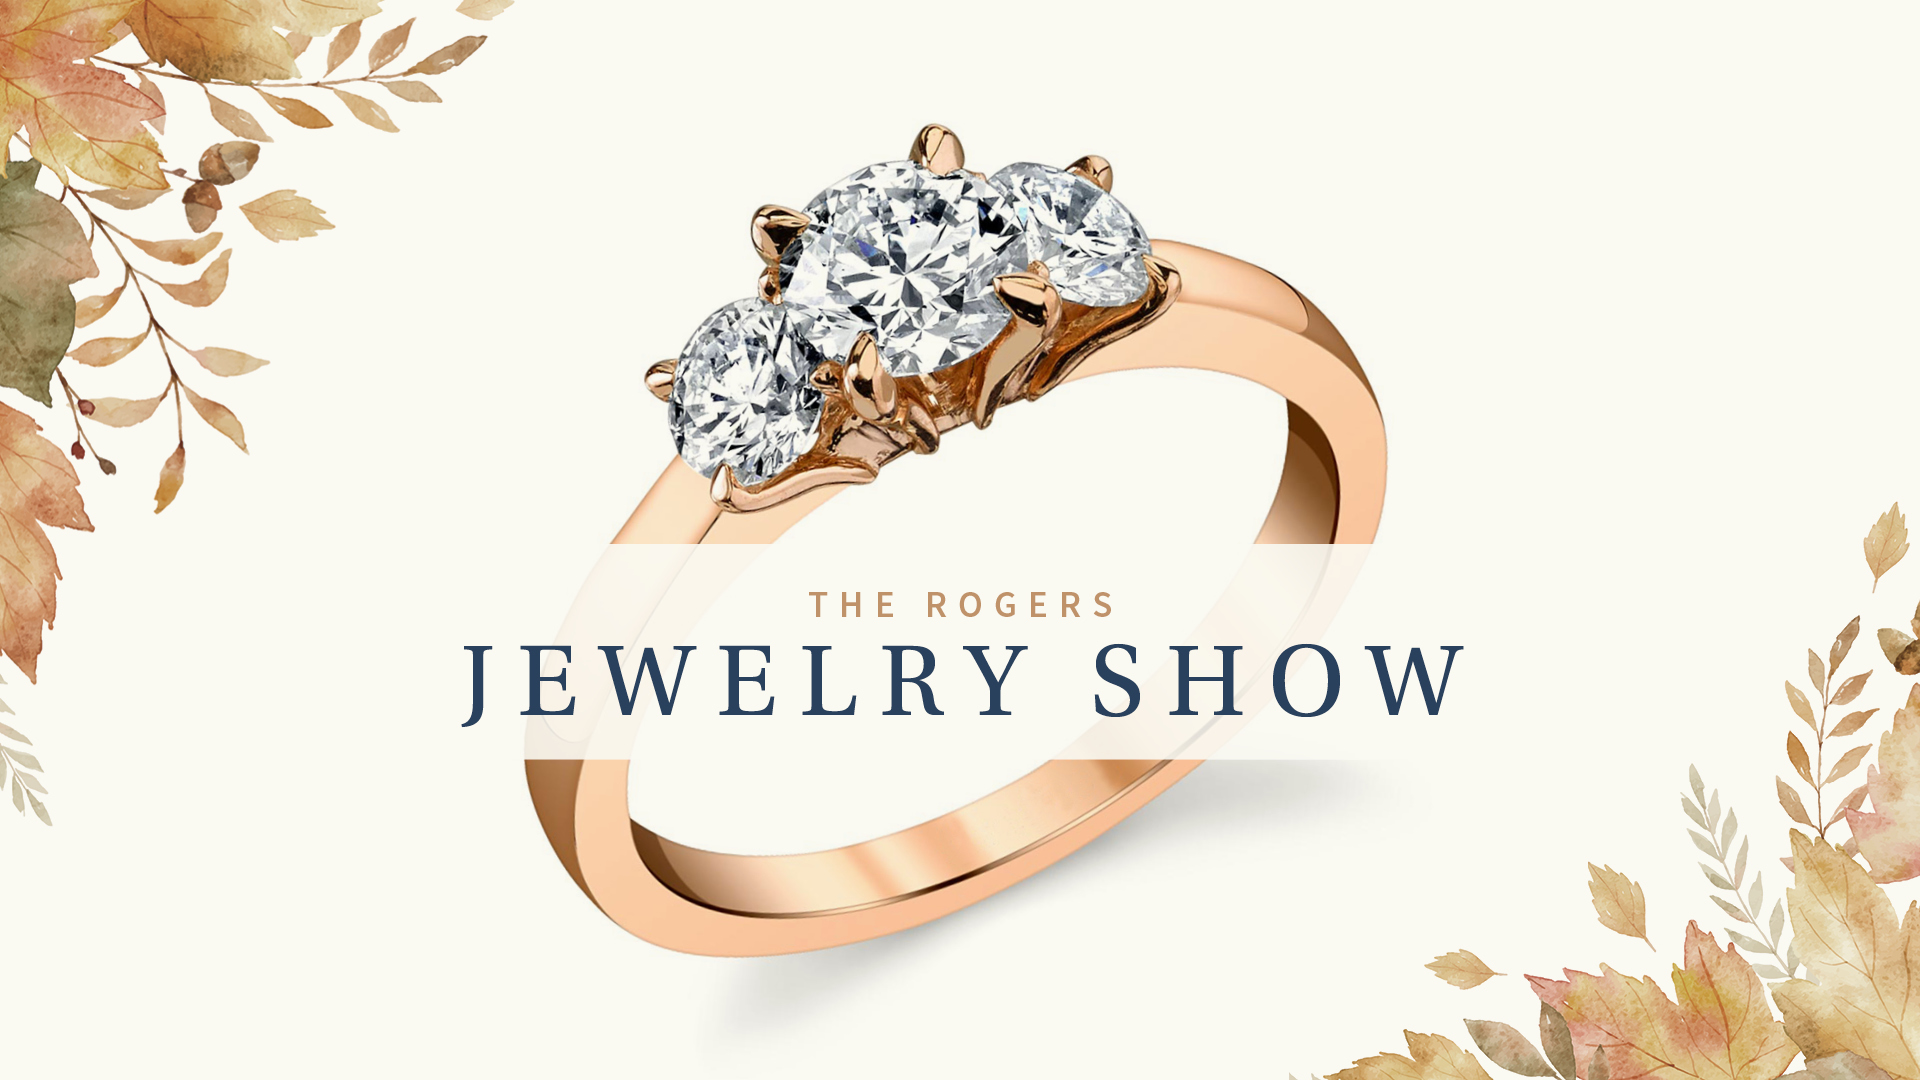 Rogers Jewelry Co. Announces Fall Jewelry Shows Across Six Participating Locations